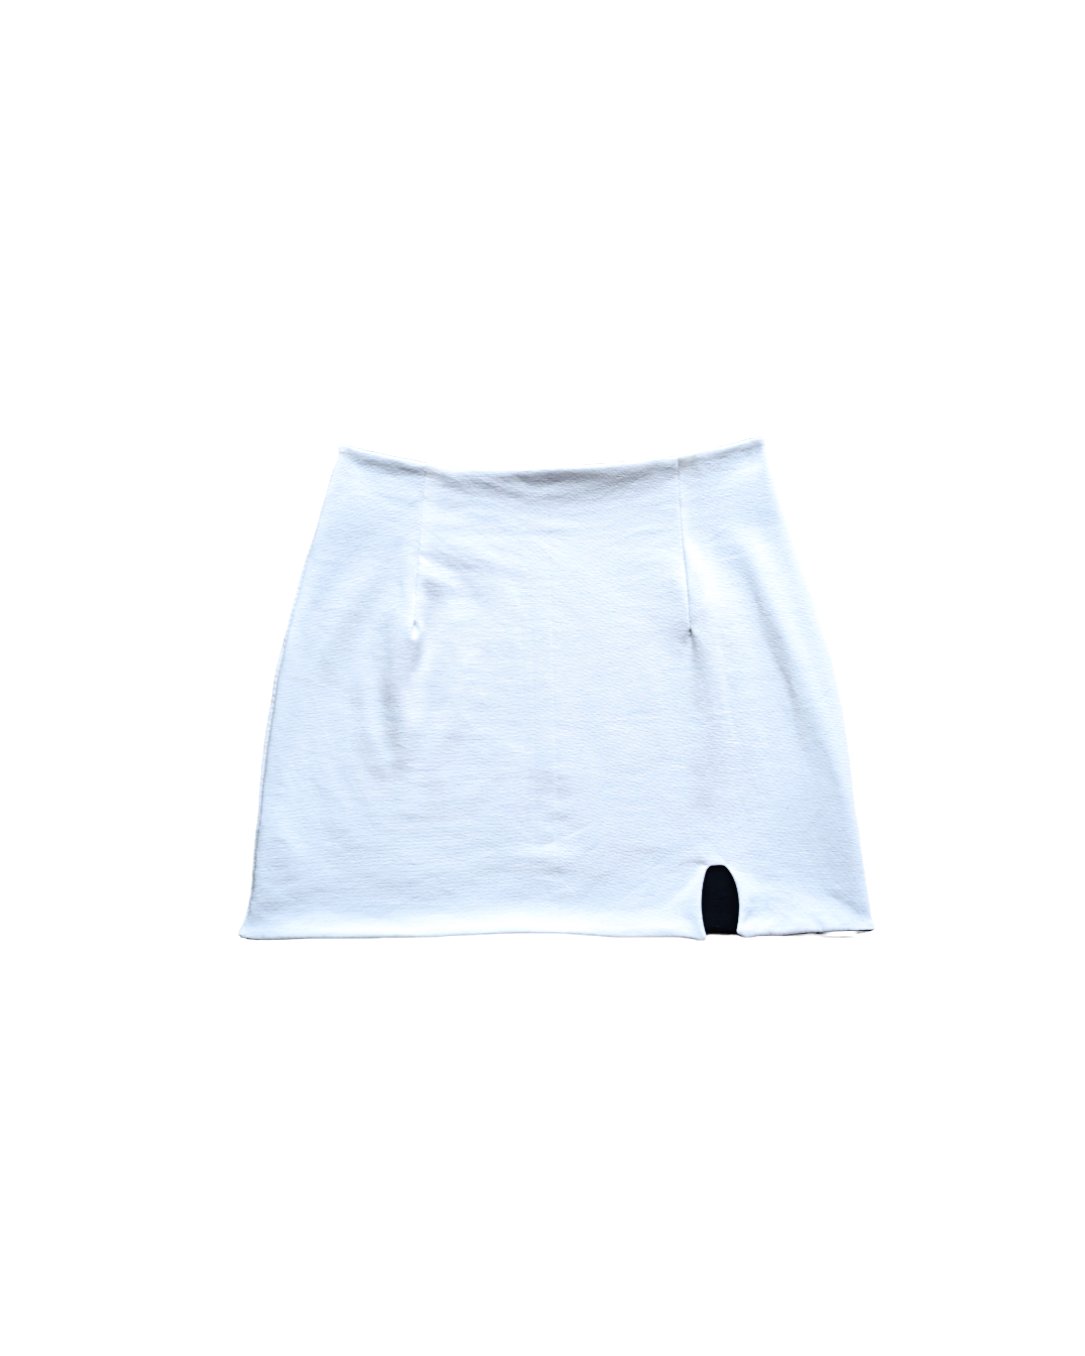 Image of CATCALL: THE REVERSIBLE MINI SKIRT in WHITE